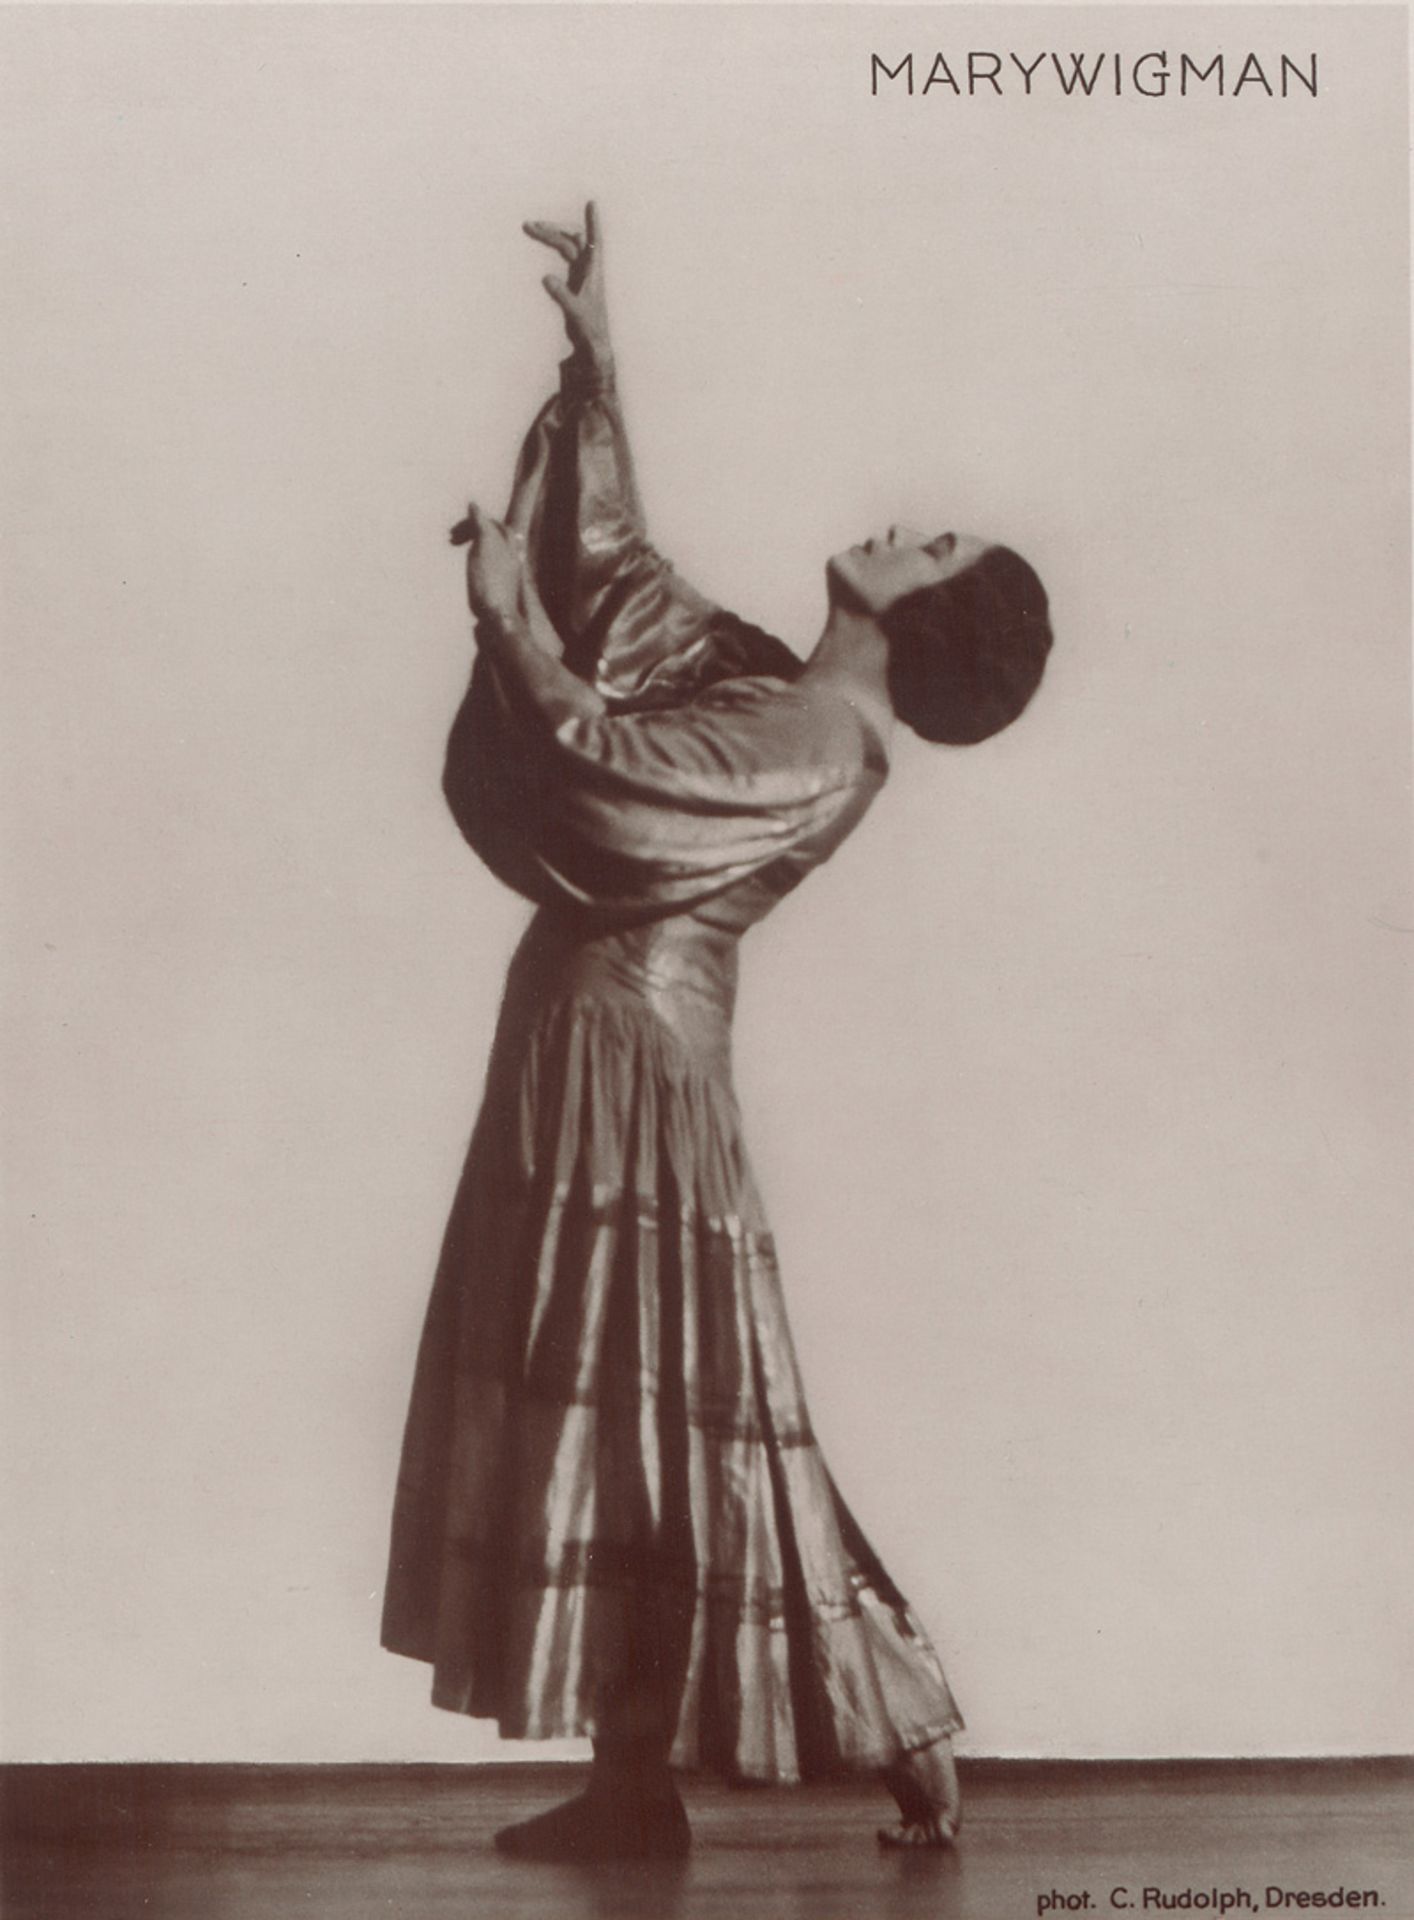 Dance Photography: Mary Wigman in dance poses